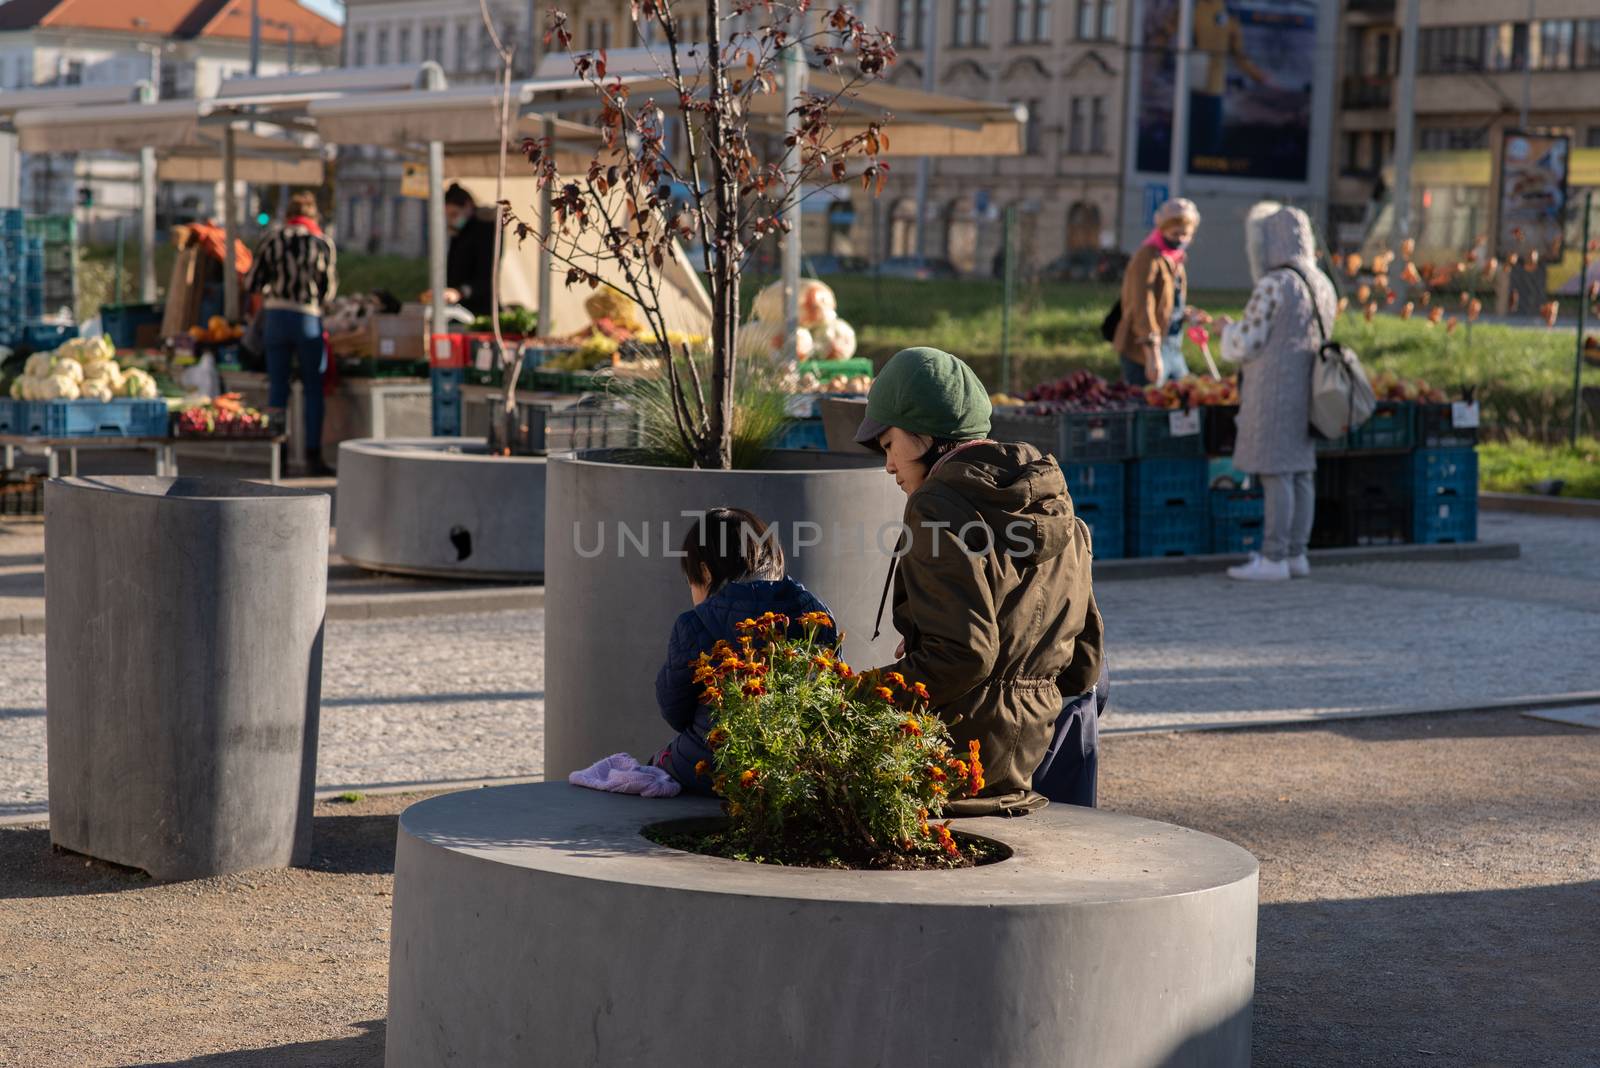 11-22-2020. Prague, Czech Republic. People during quarantine period due to coronavirus (COVID-19) at Hradcanska metro stop in Prague 6. Mother and son eating.